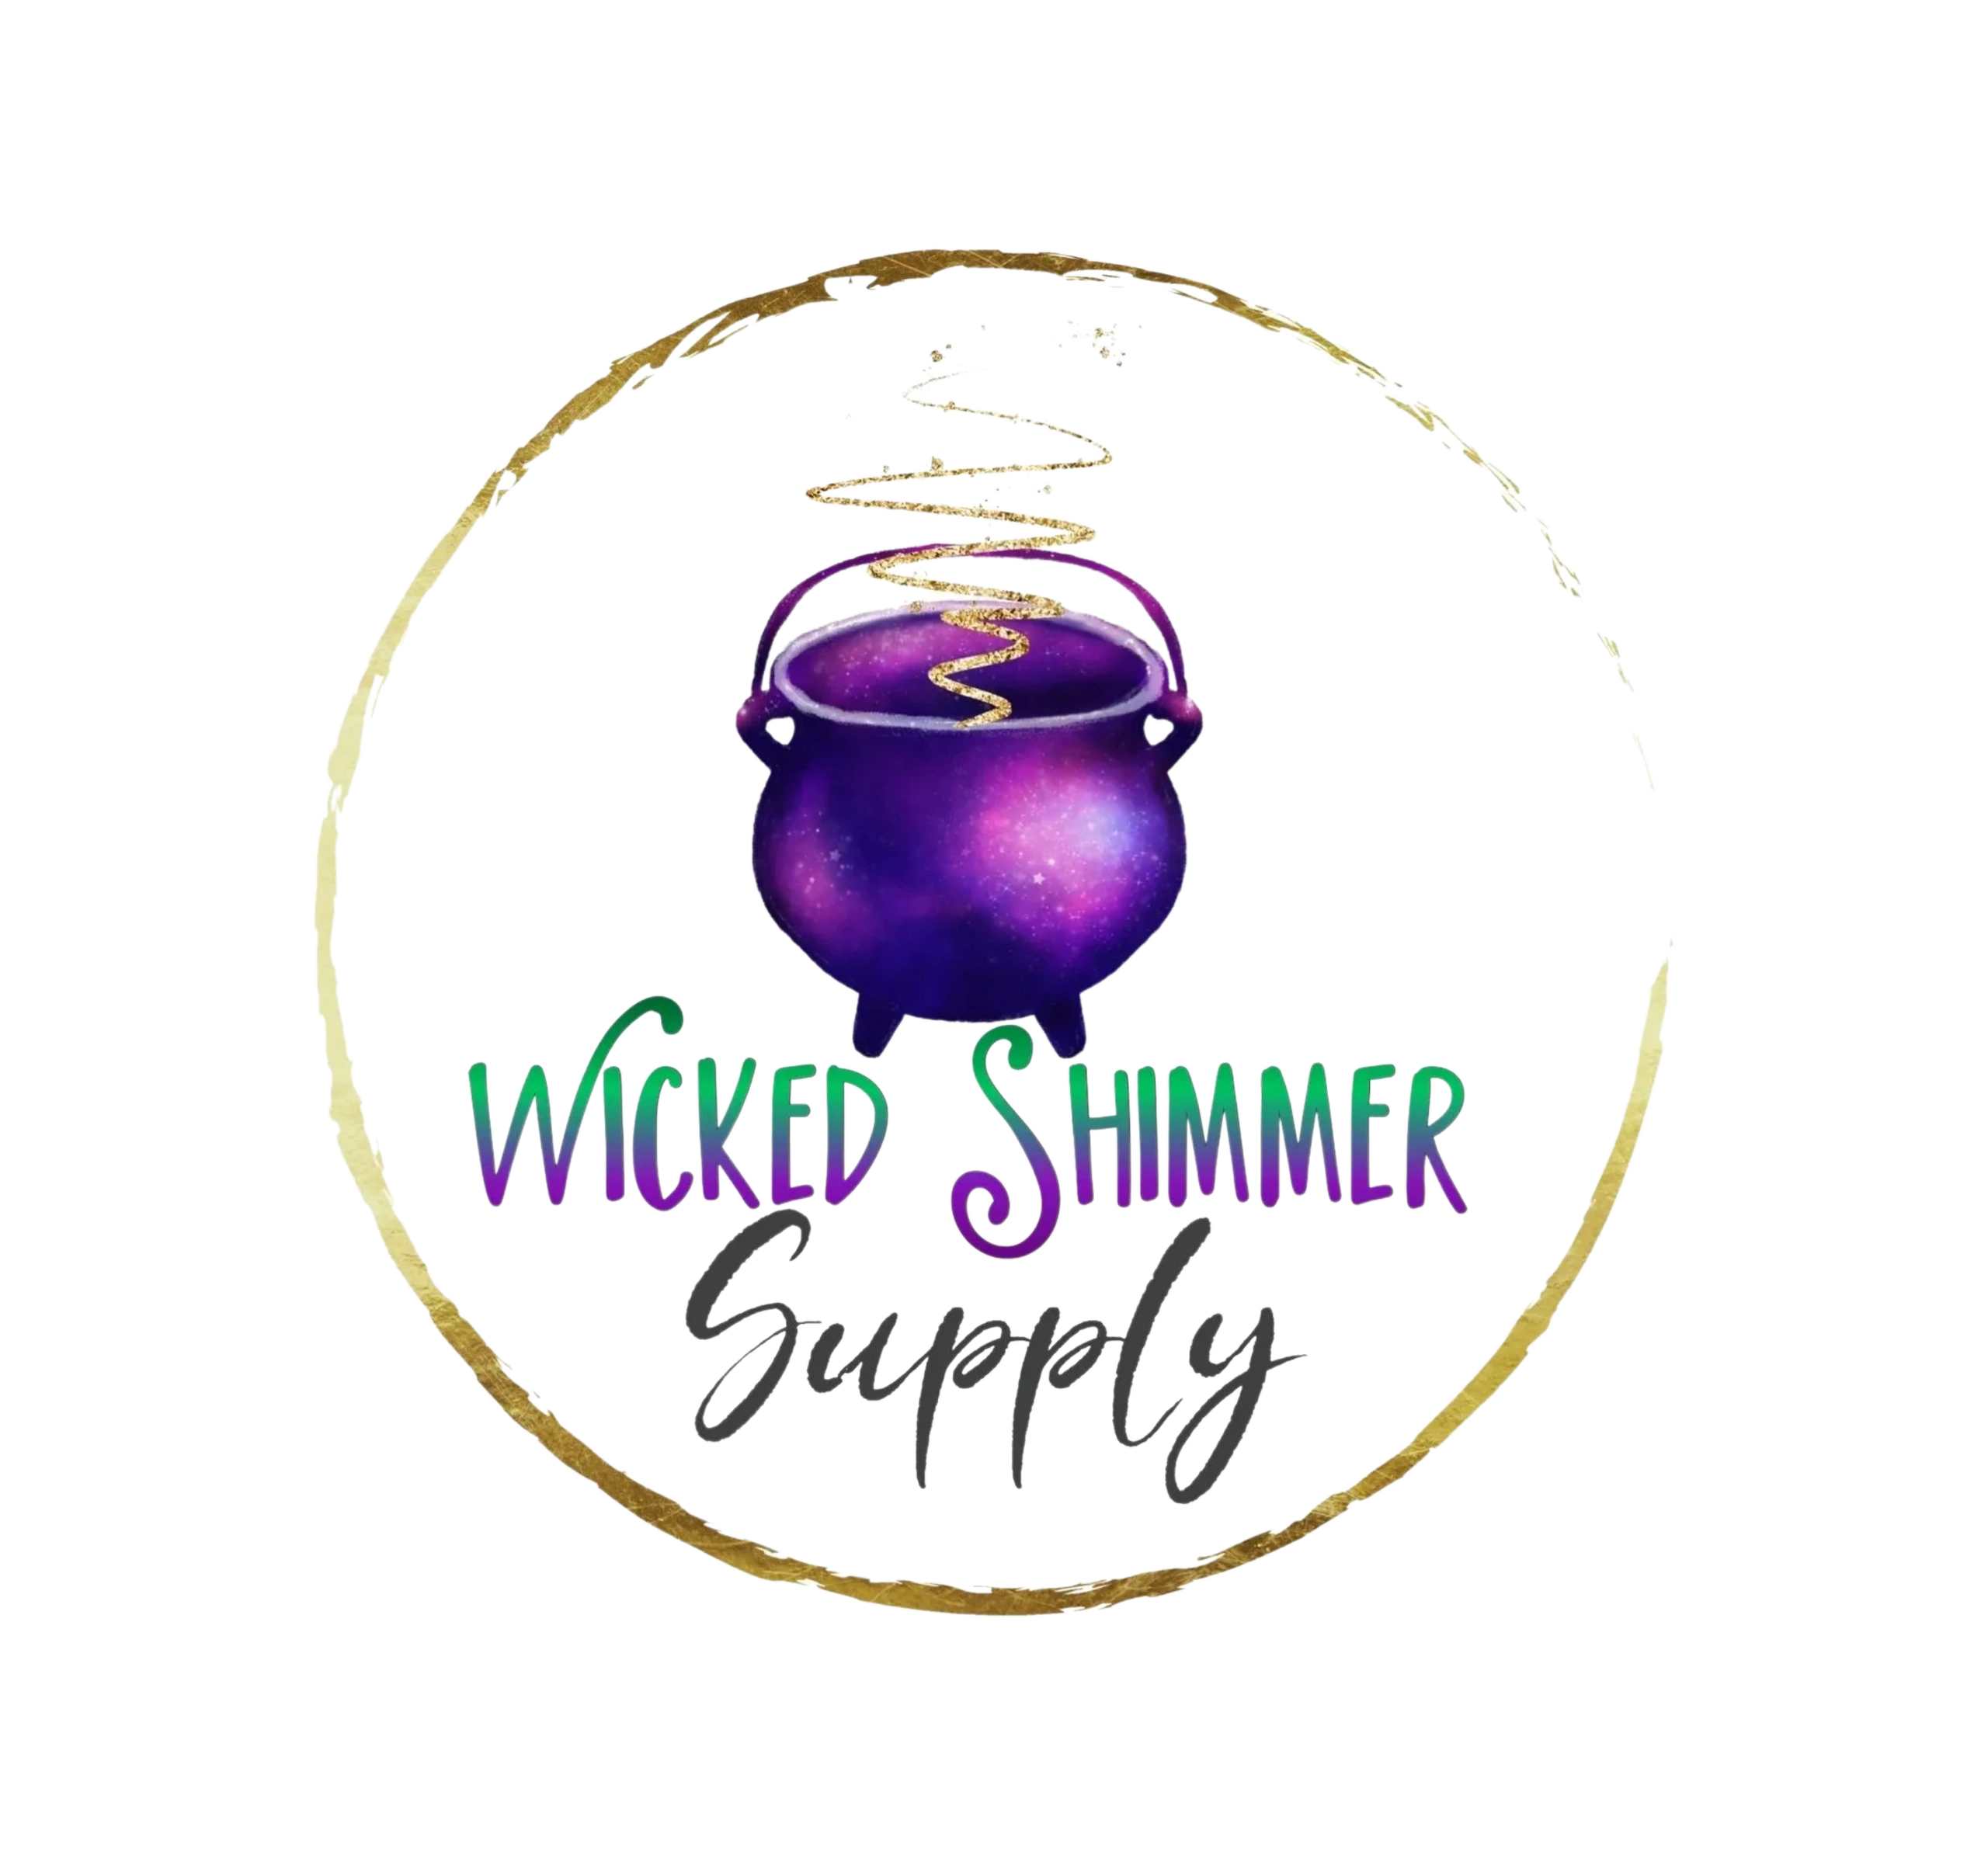 77 Wicked Shimmer Supply ideas